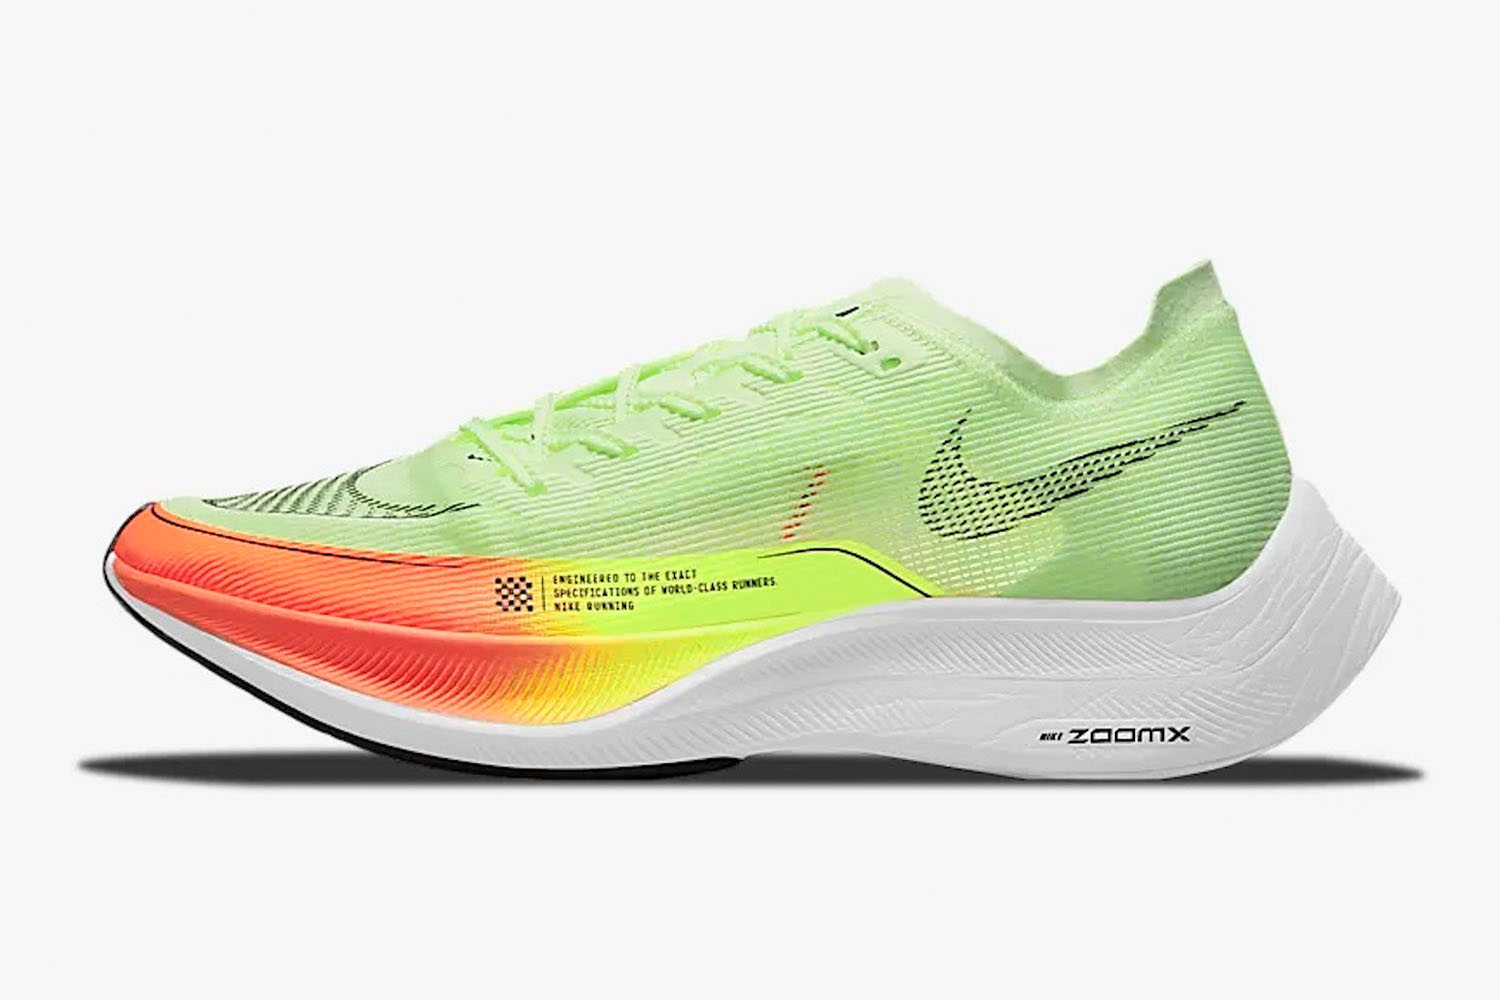 The neon and red Nike Vaporfly running shoe on a white background